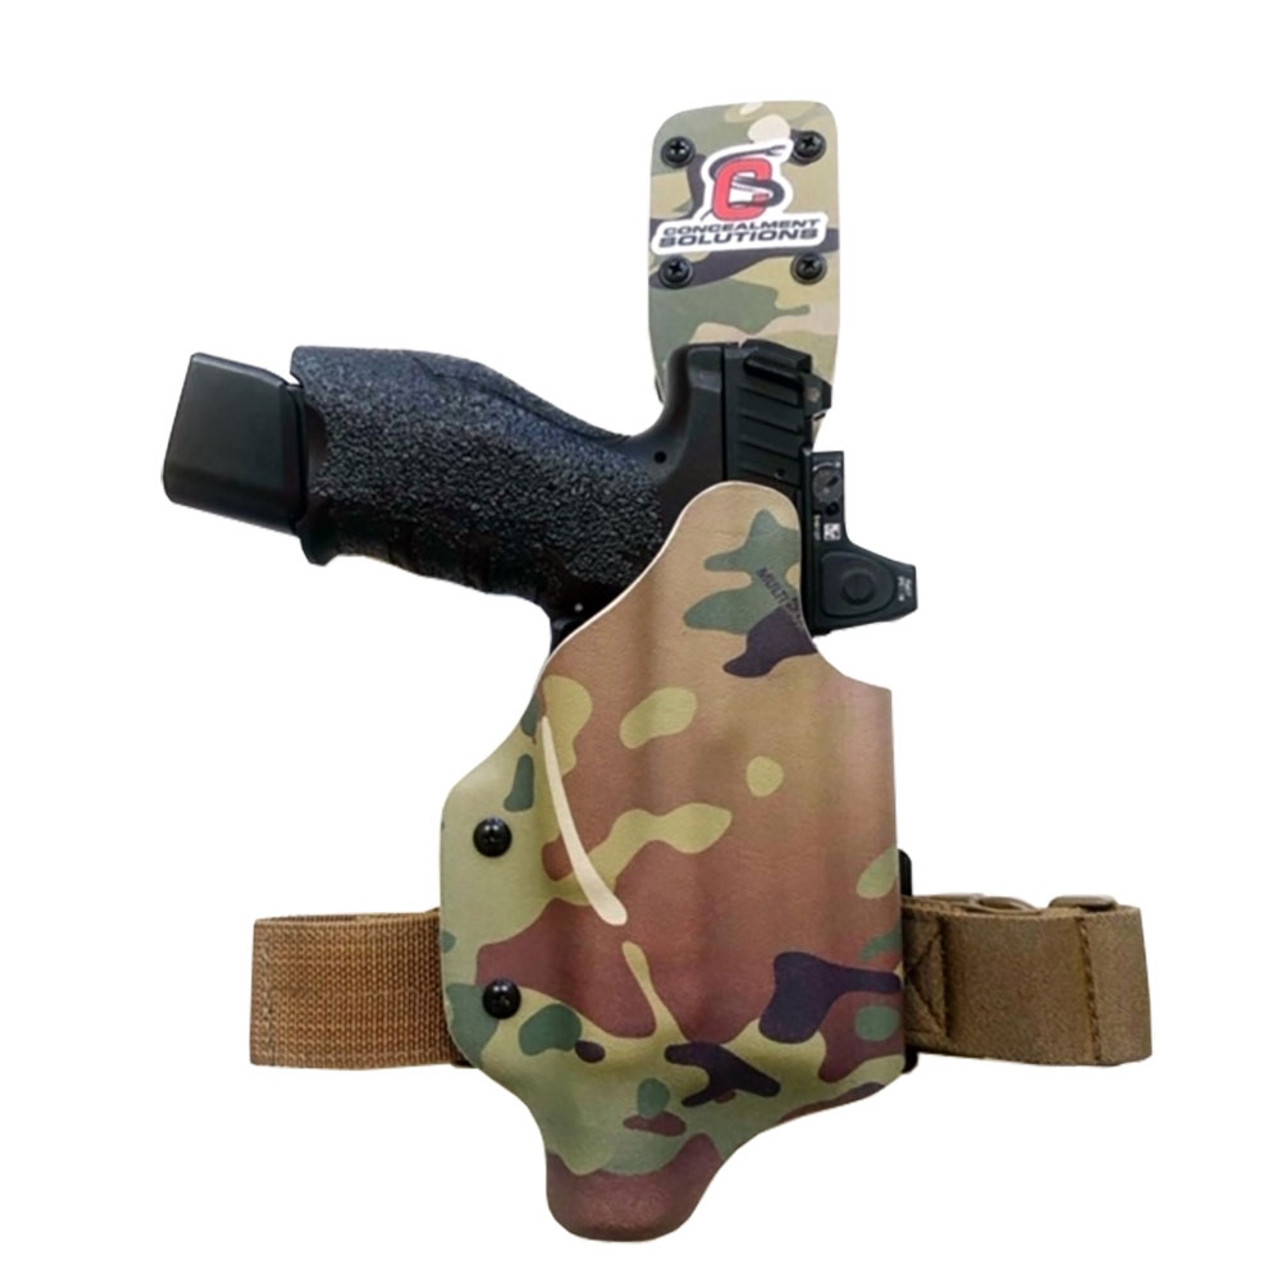 Cobra Dropleg Holster w/tactical lights and lasers